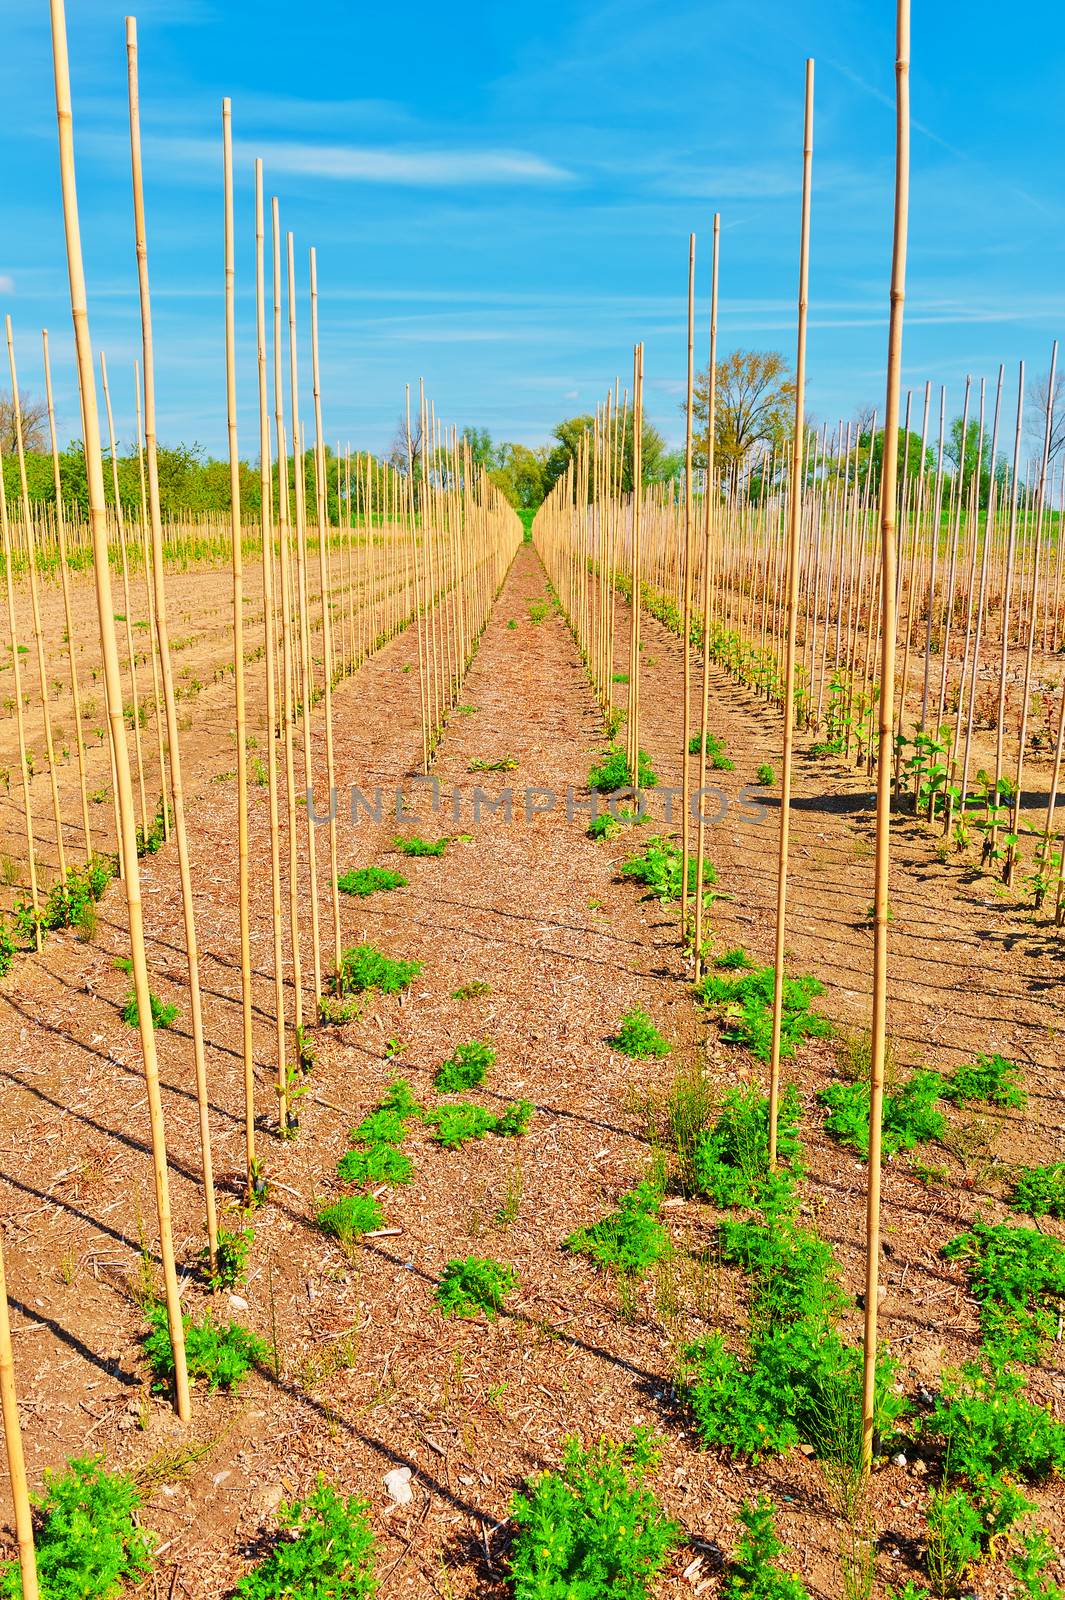 Bamboo Sticks Supporting Young Plants in the Netherlands